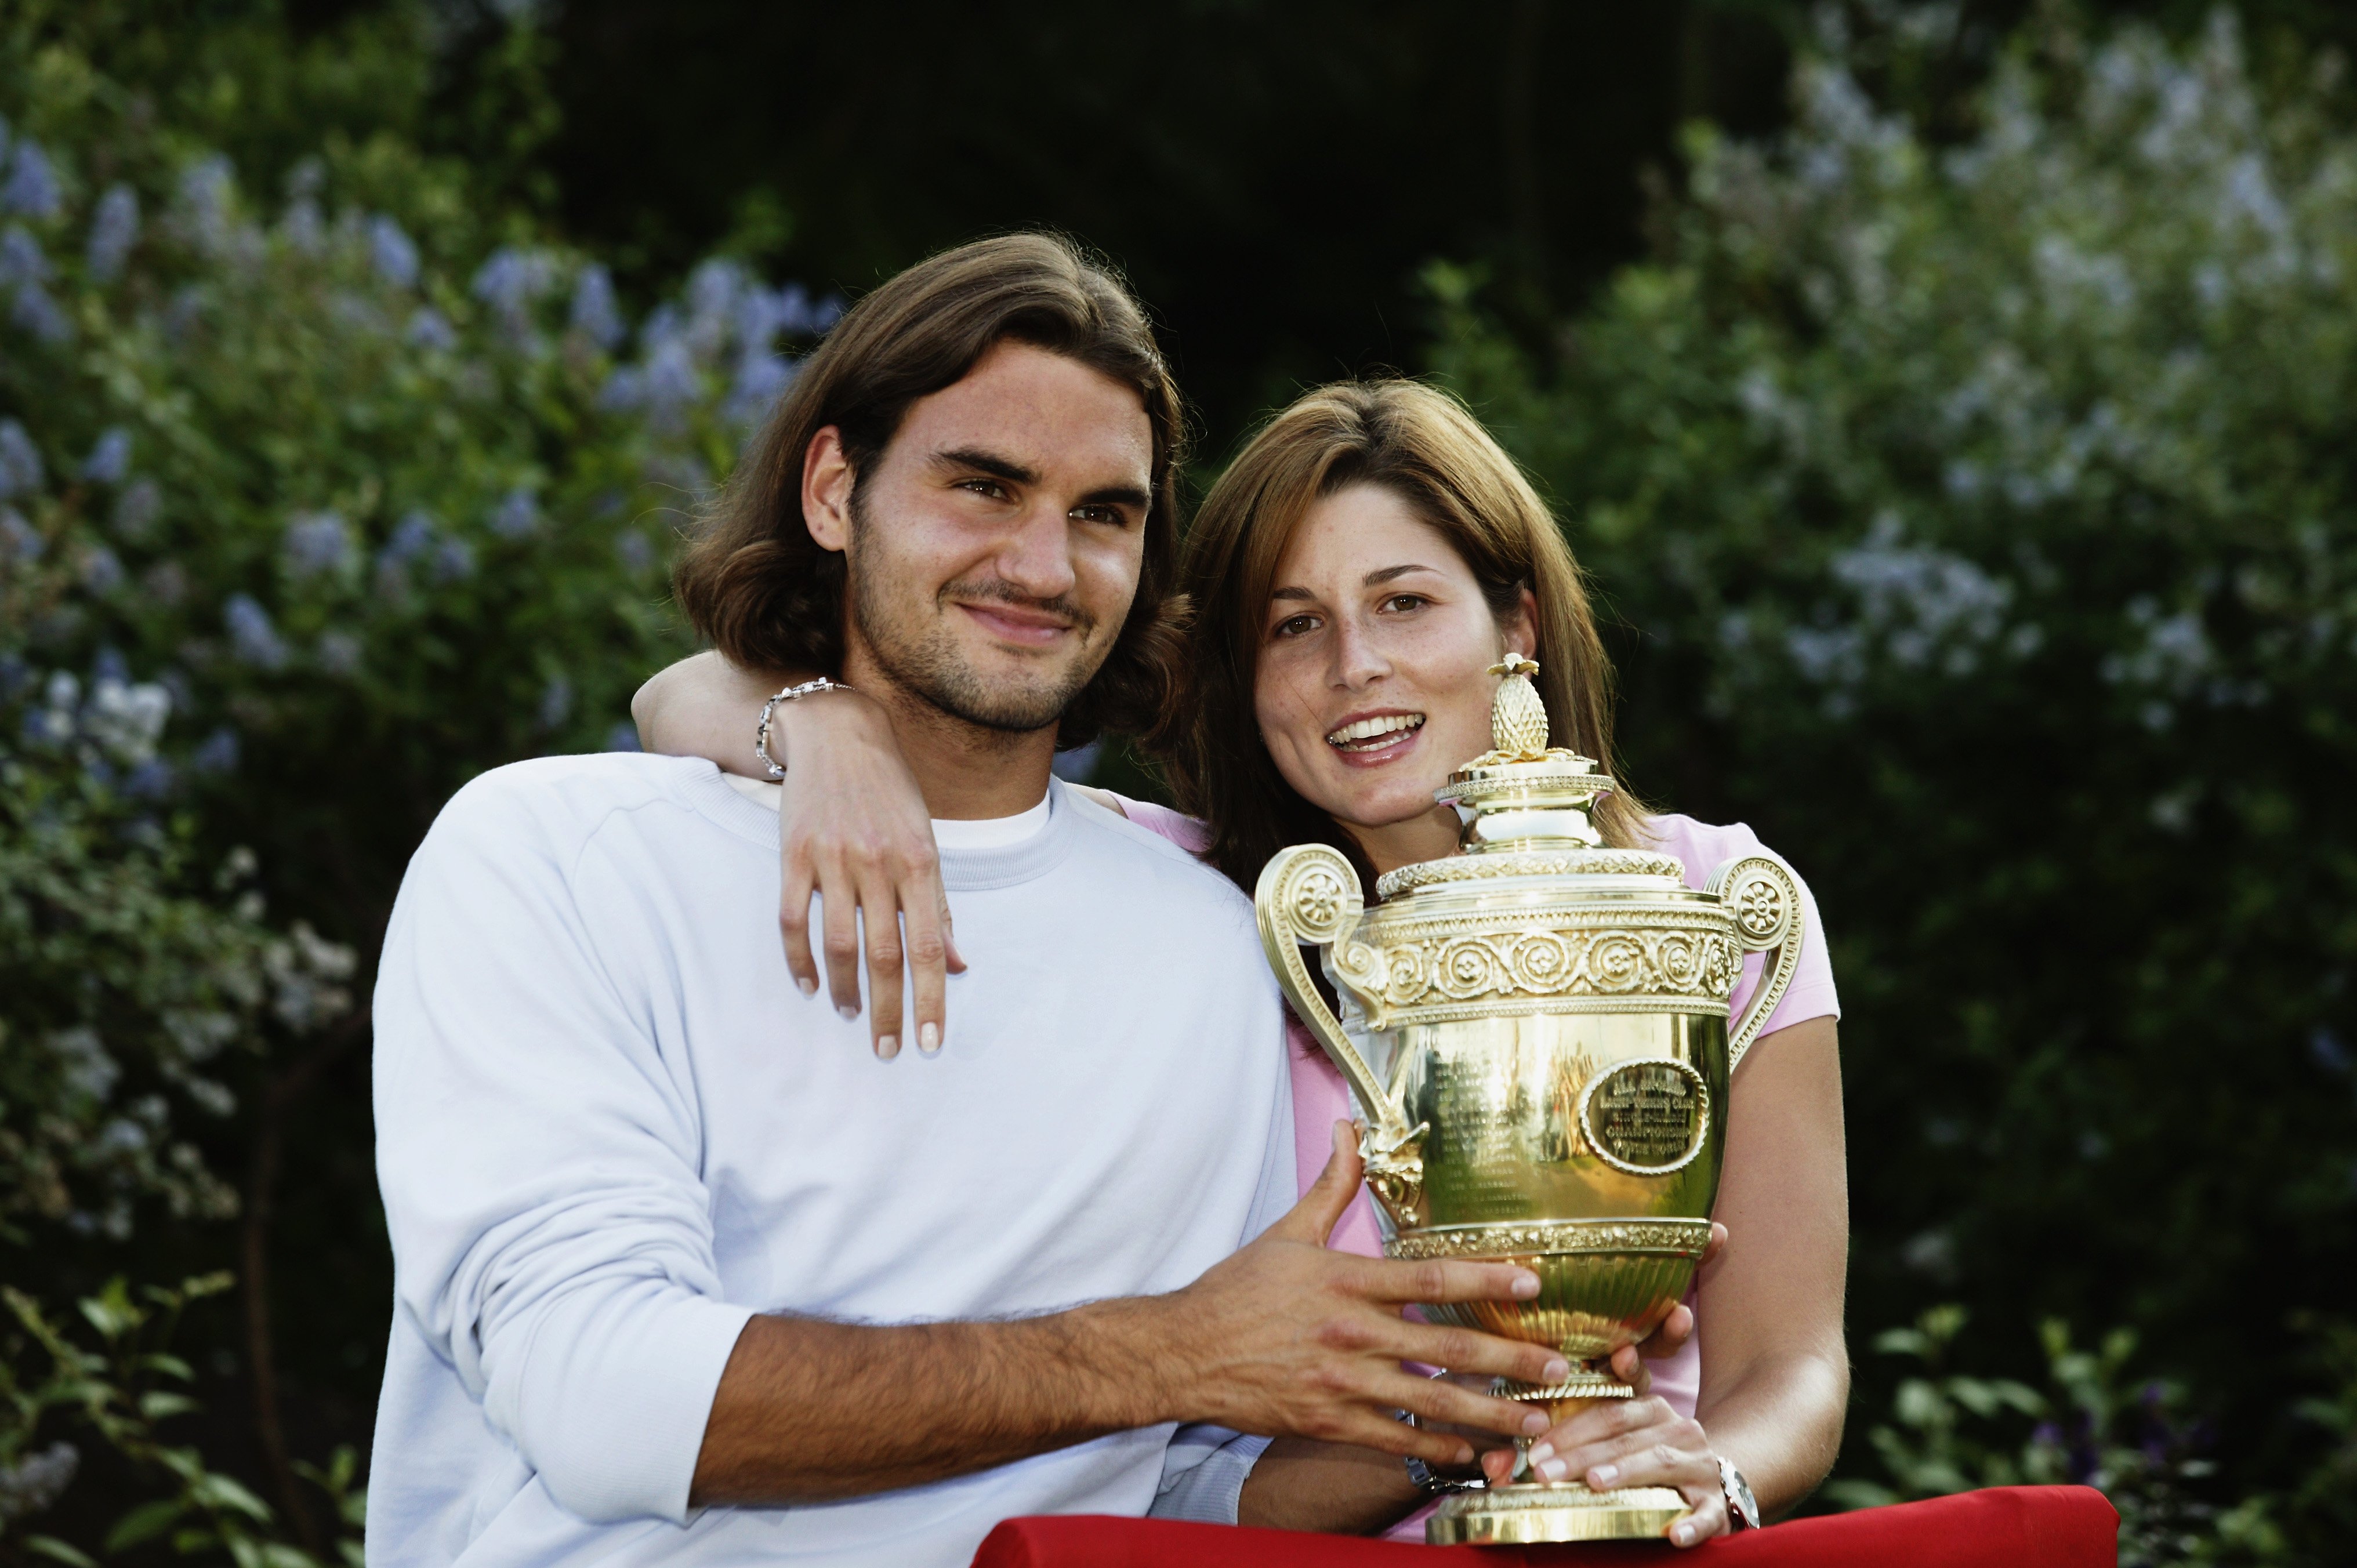 Men's Singles champion Roger Federer poses with Miroslava Vavrinec and the trophy after his victory in the Men's Singles Final during the final day of the Wimbledon Lawn Tennis Championships held on July 6, 2003 in Wimbledon, London. | Source: Getty Images